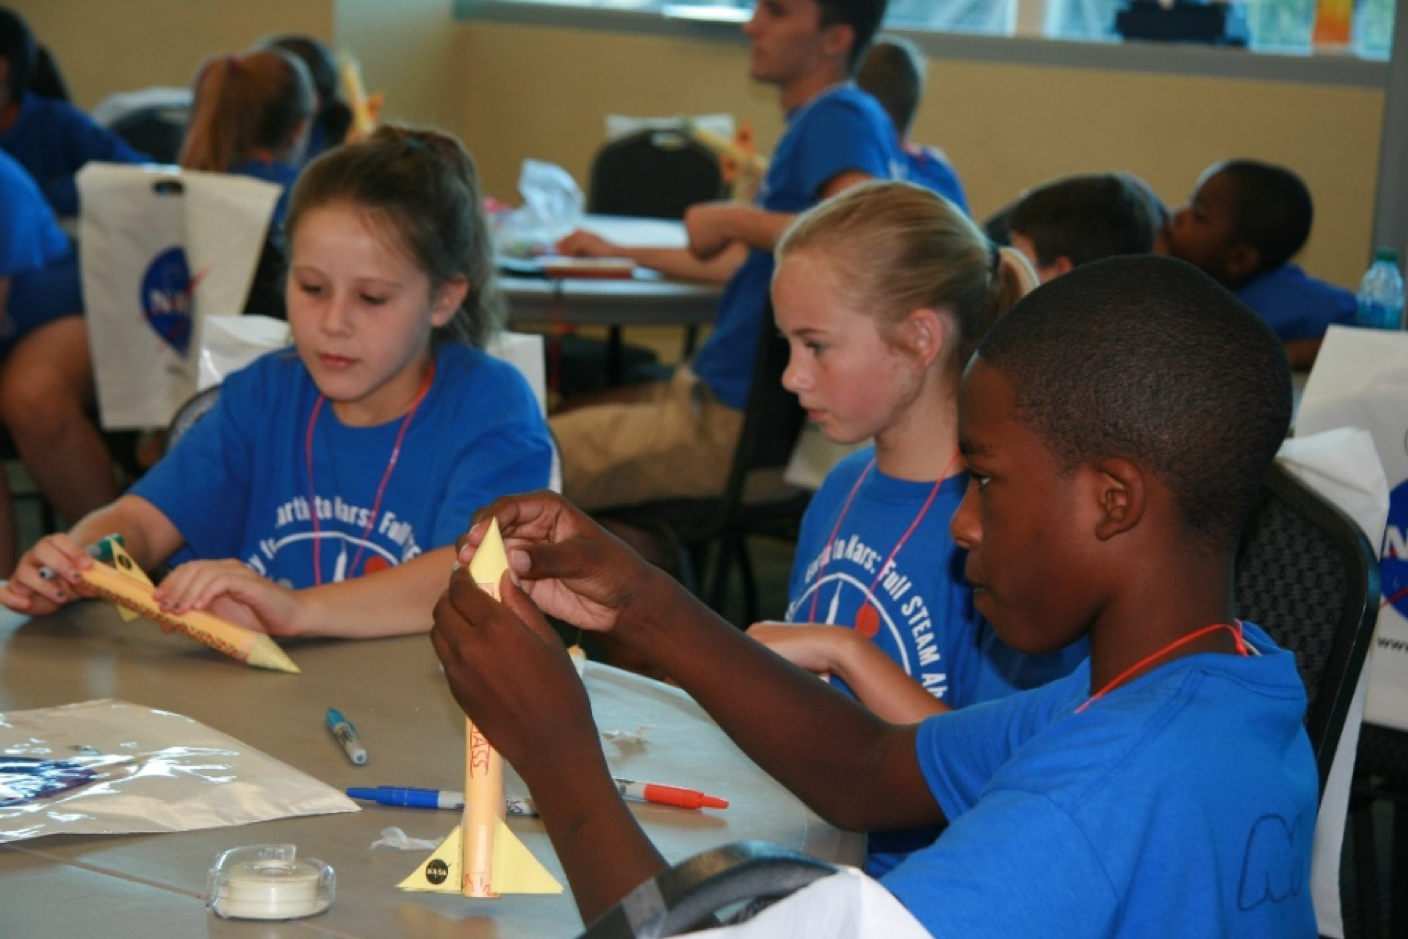 Kids in blue tshirts sitting at a table working on a science project